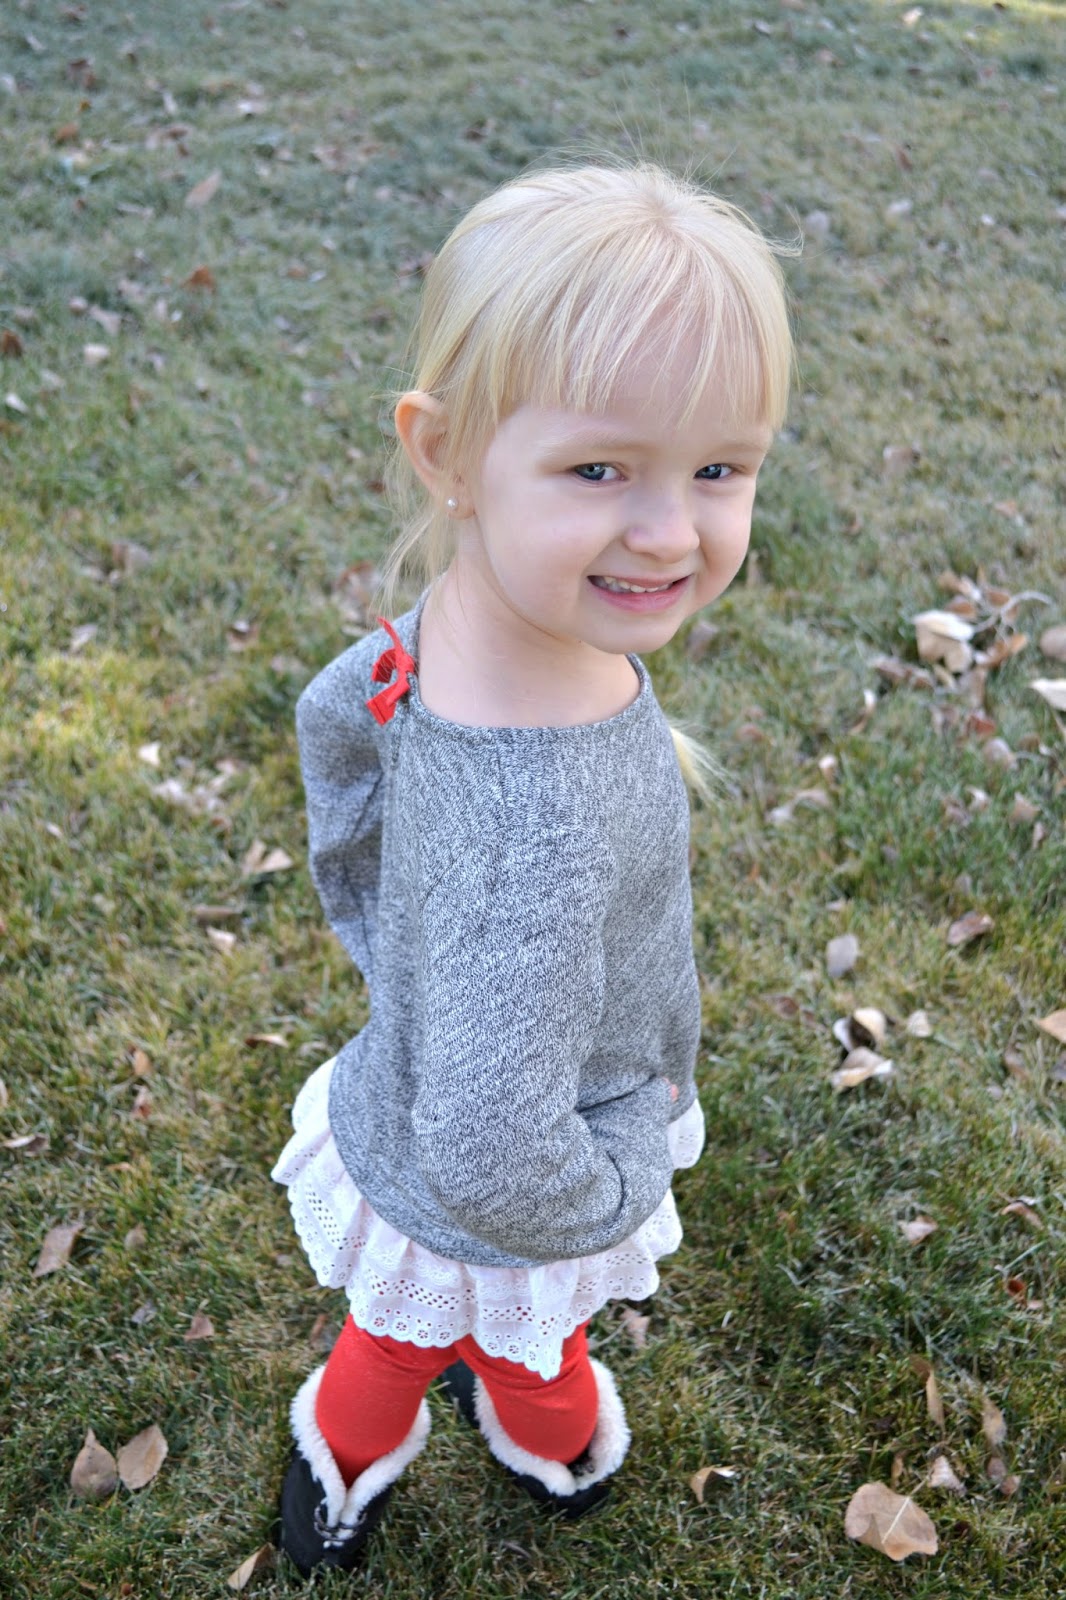 Holiday Stylin' with OshKosh B’gosh + Giveaway | Building Our Story